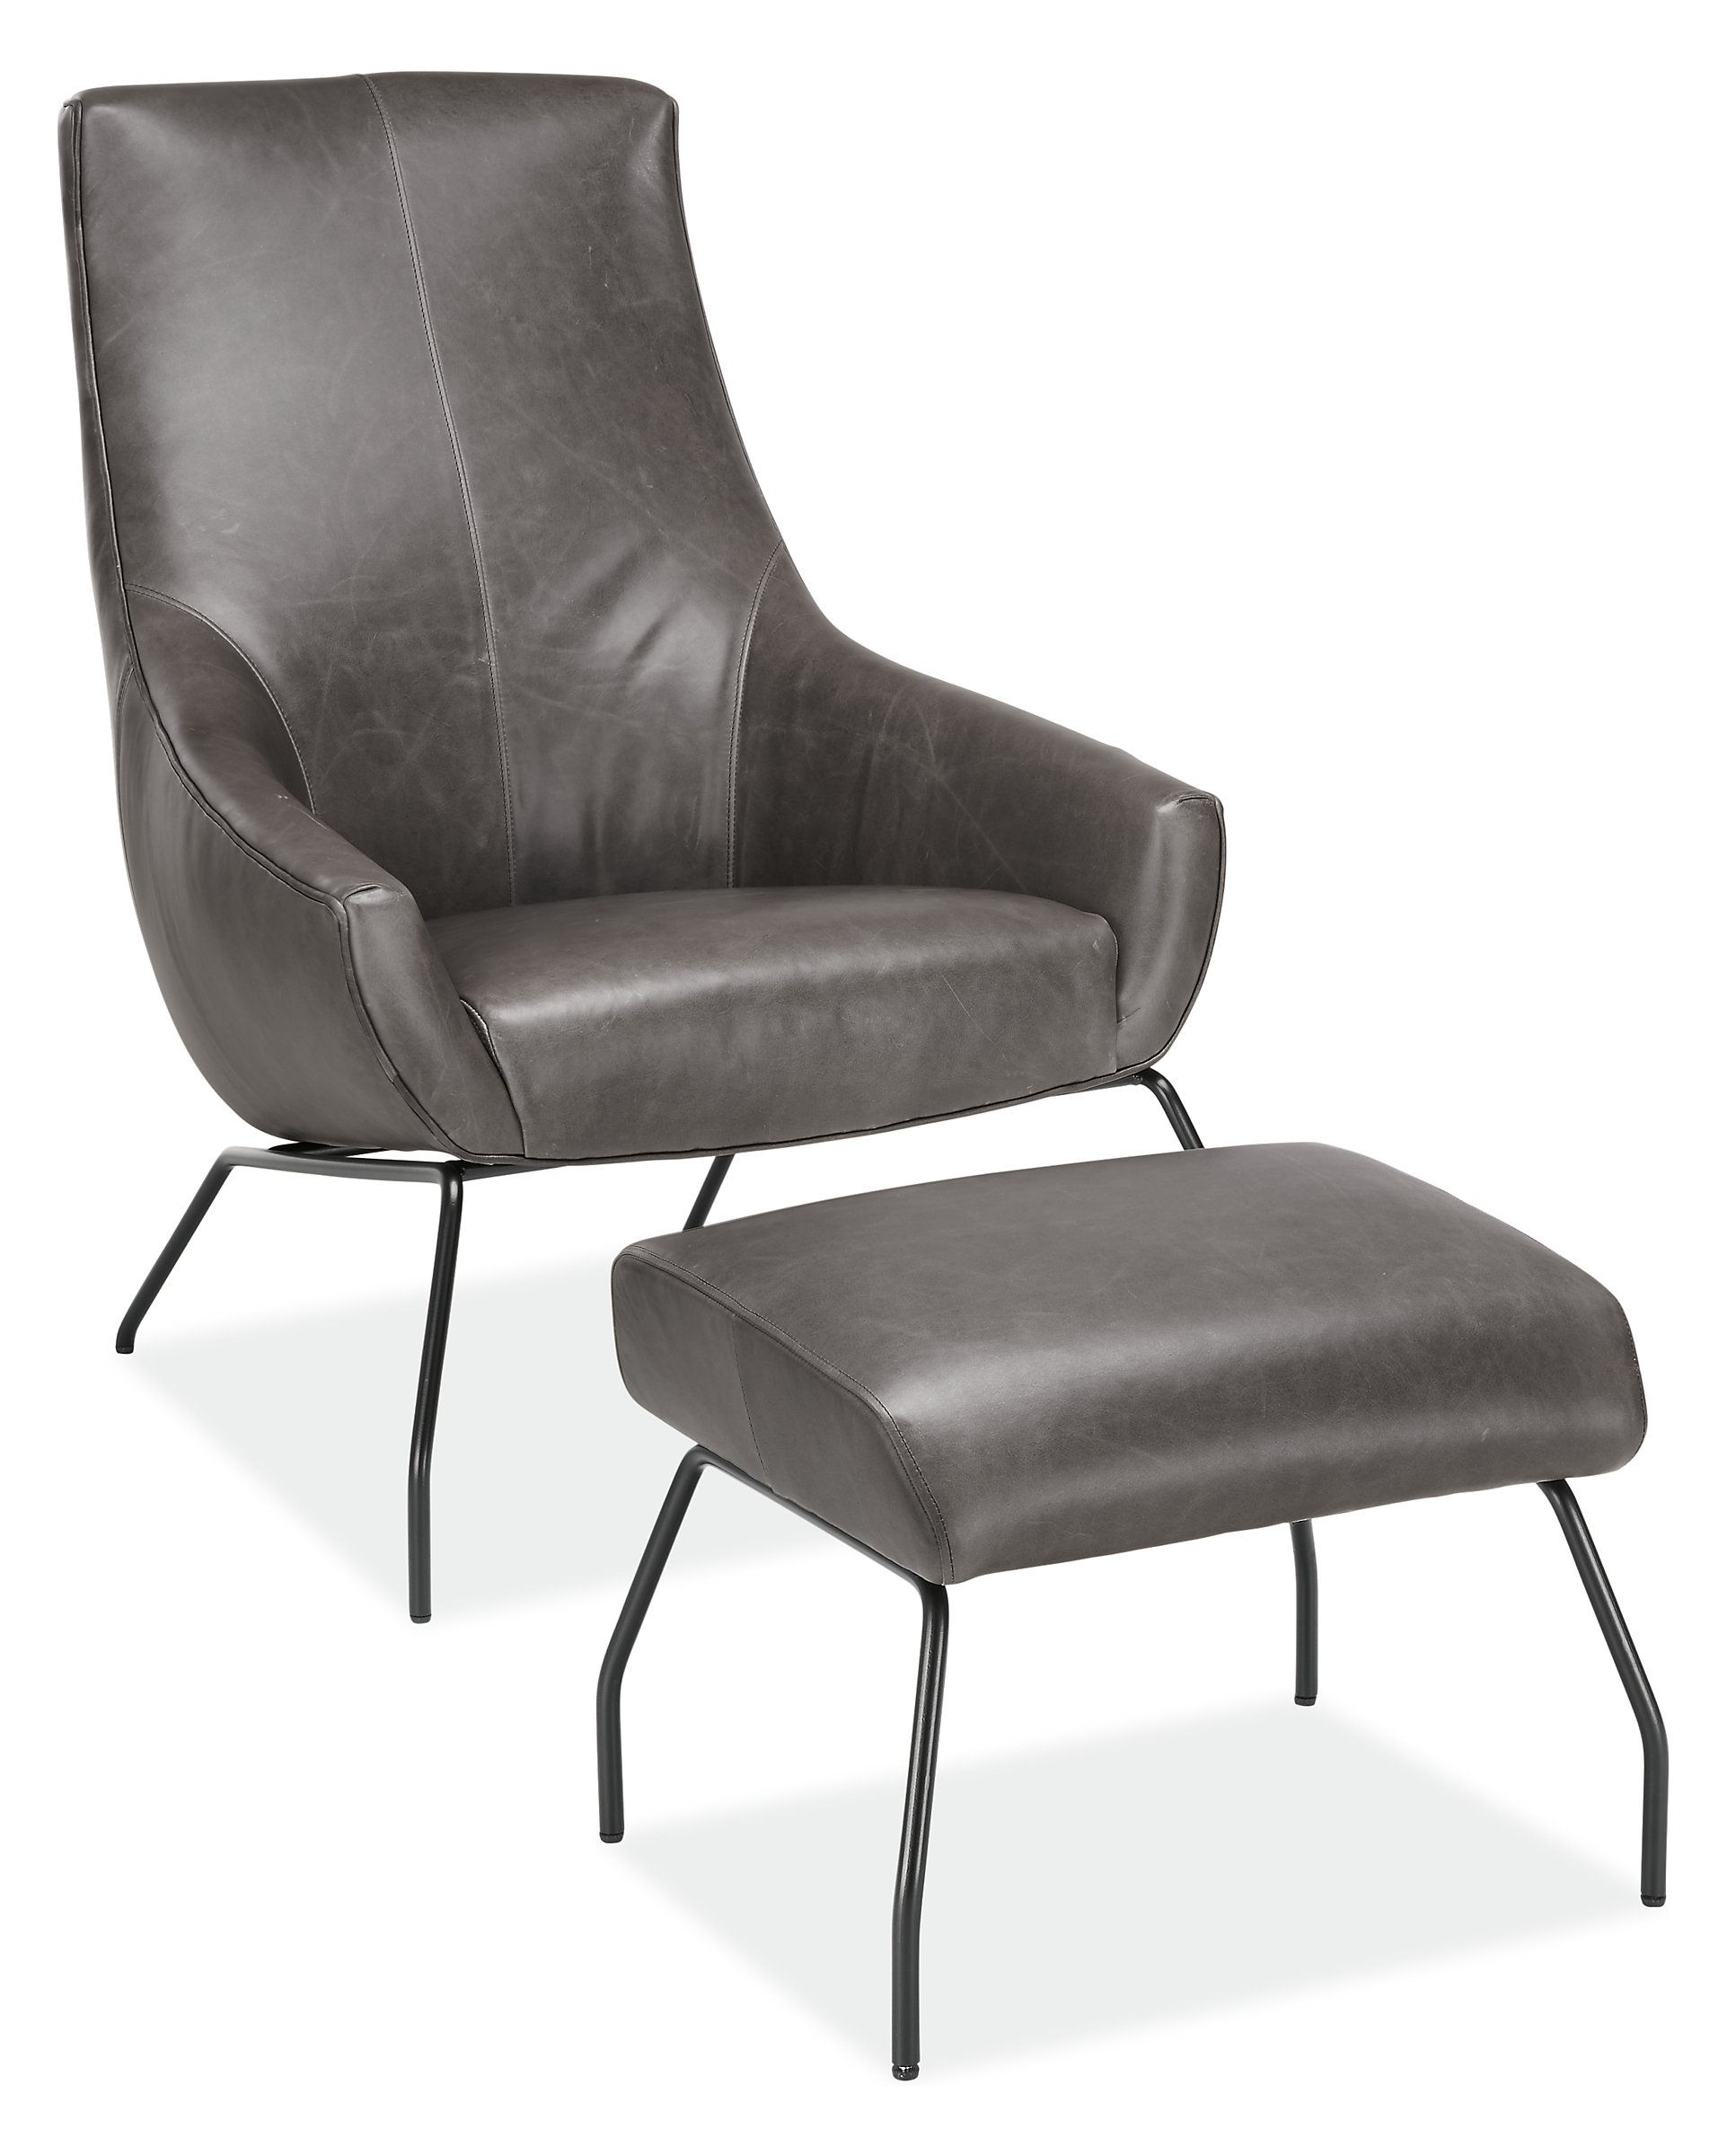 Rhodes Lounge Chair and Ottoman in Vento Leather.